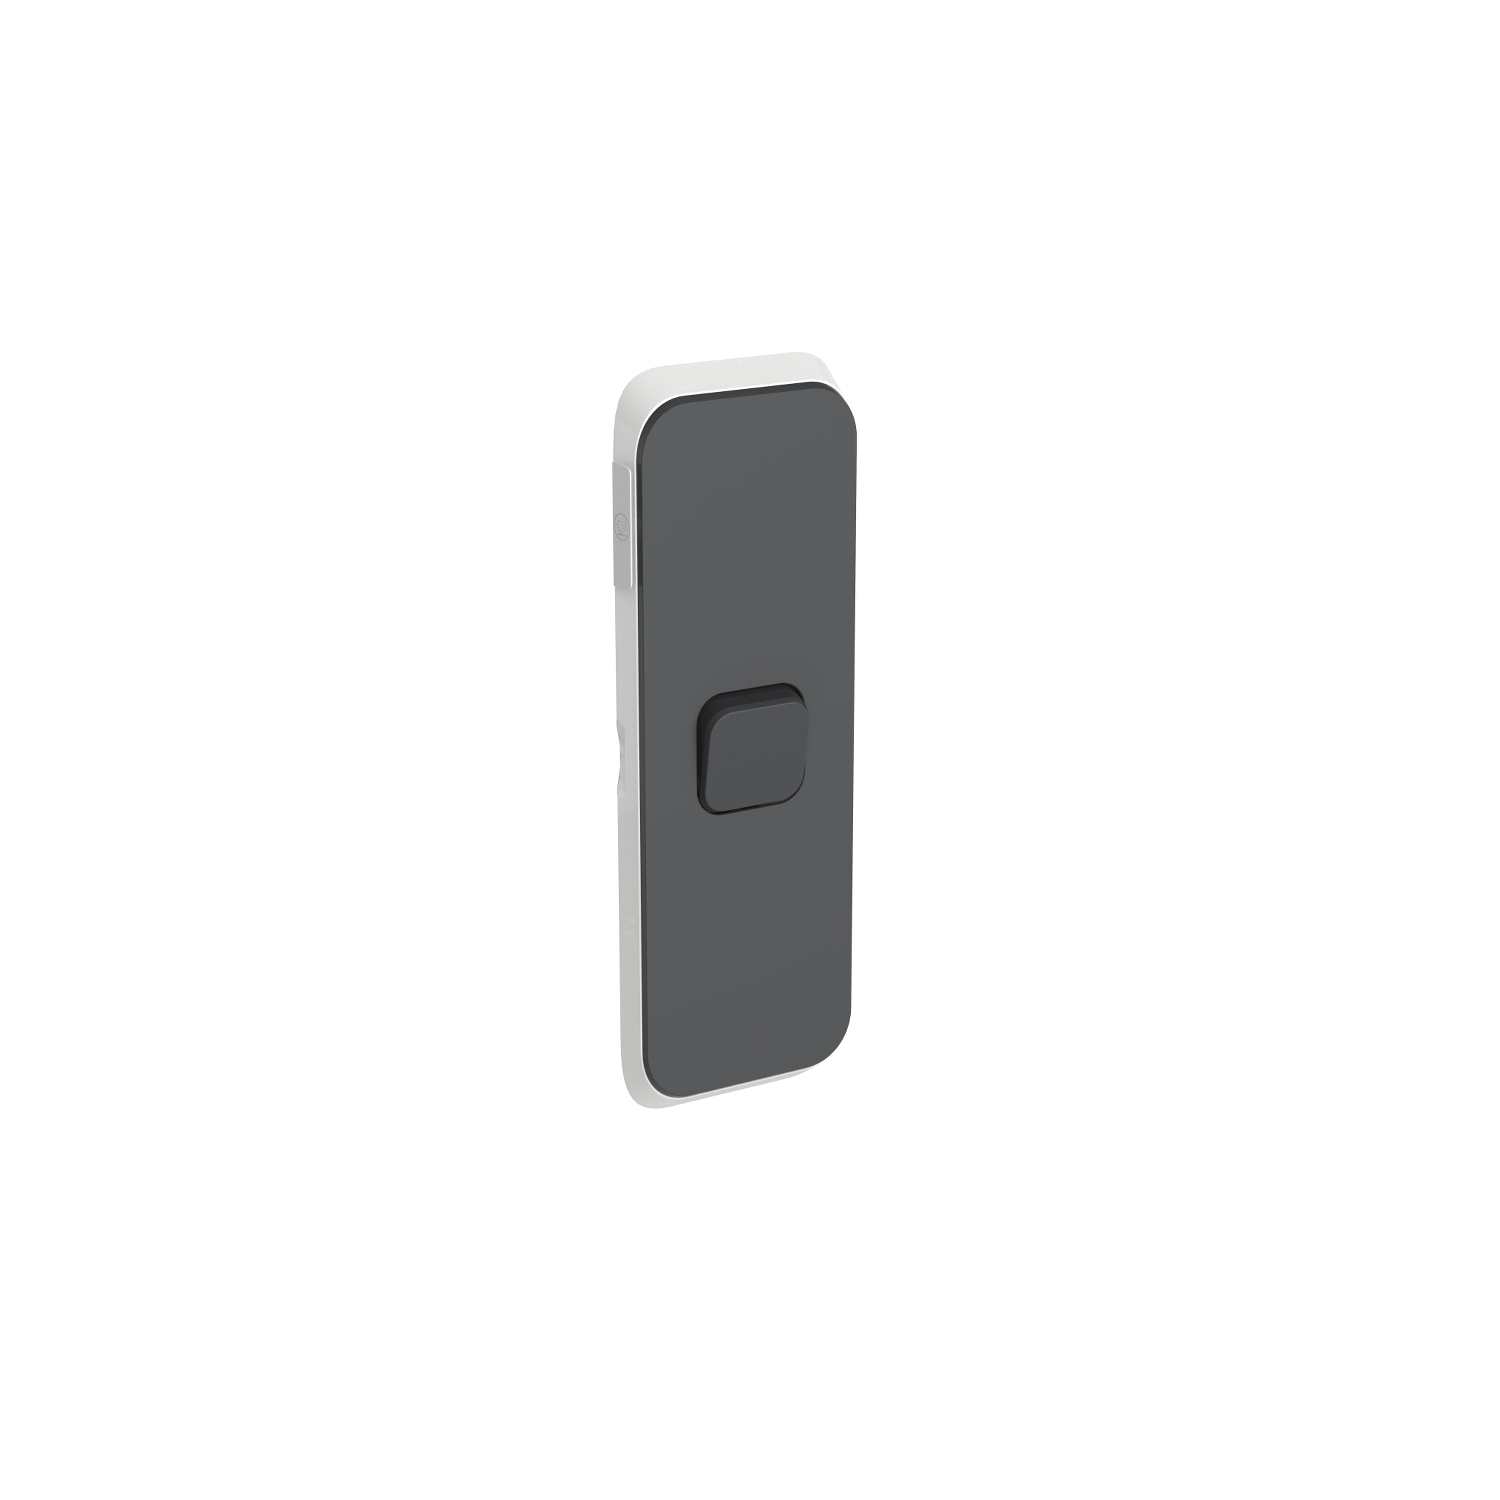 PDL361C-AN - PDL Iconic Cover Plate Switch Architrave 1Gang - Anthracite